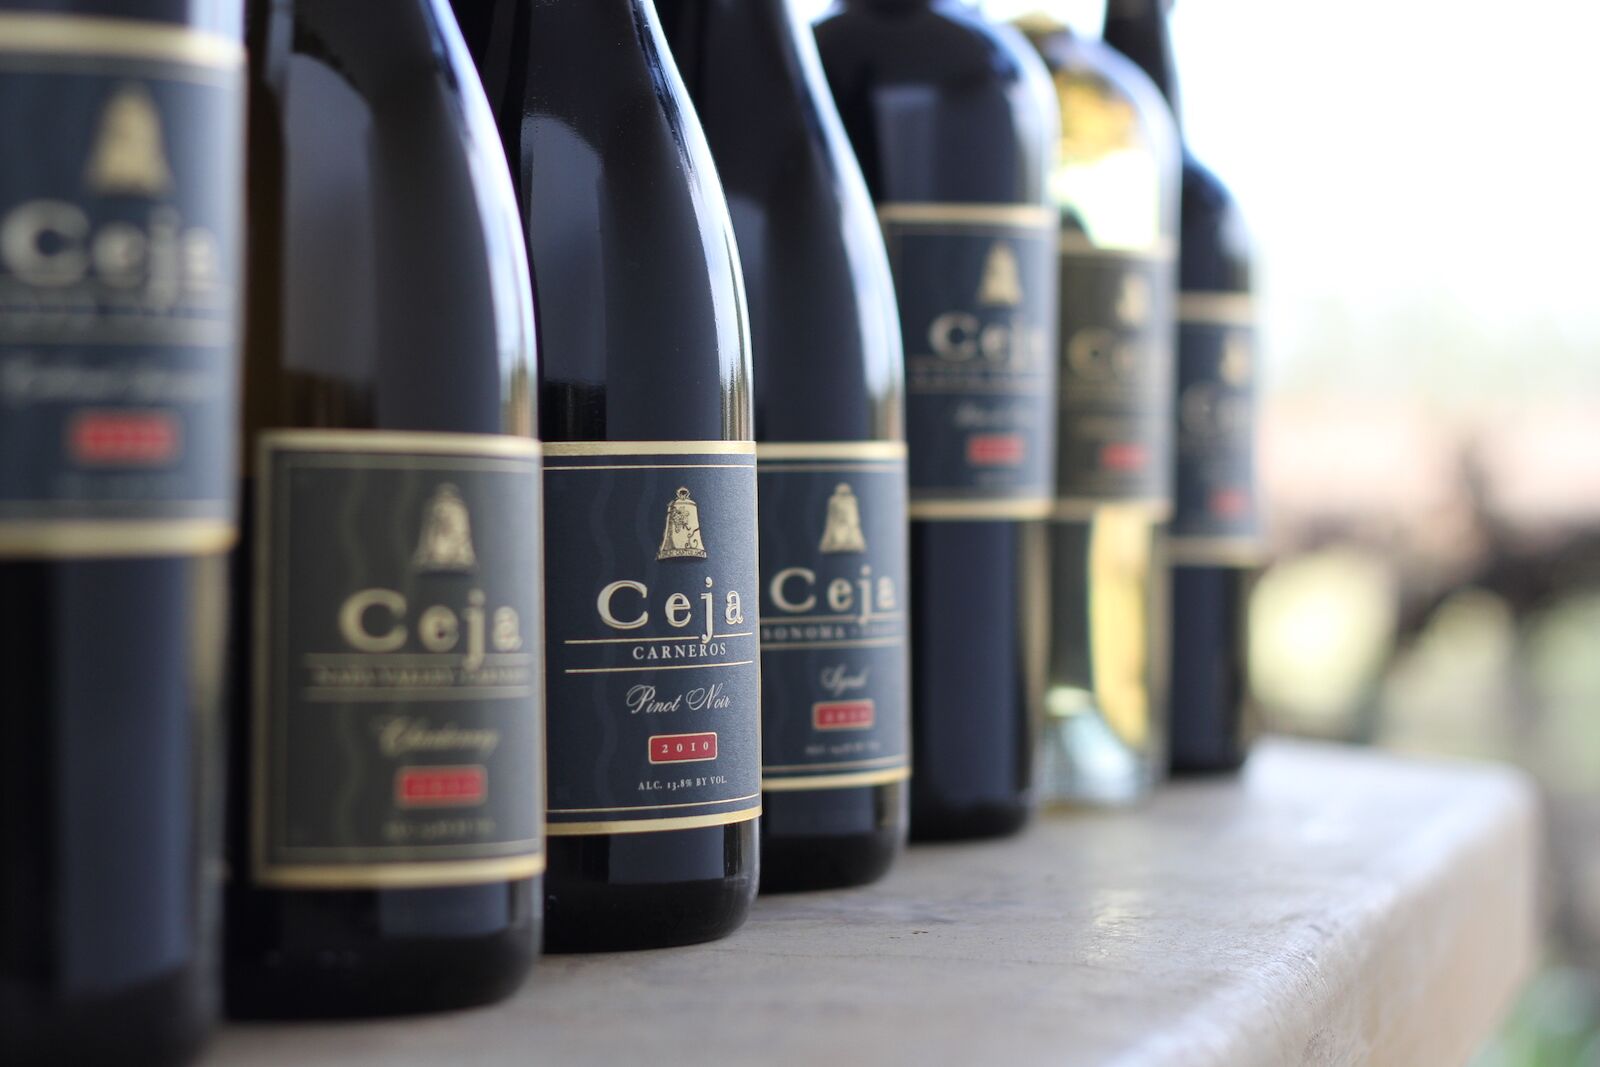 Ceja Wine Bottles lined up on the counter, sonoma tasting rooms